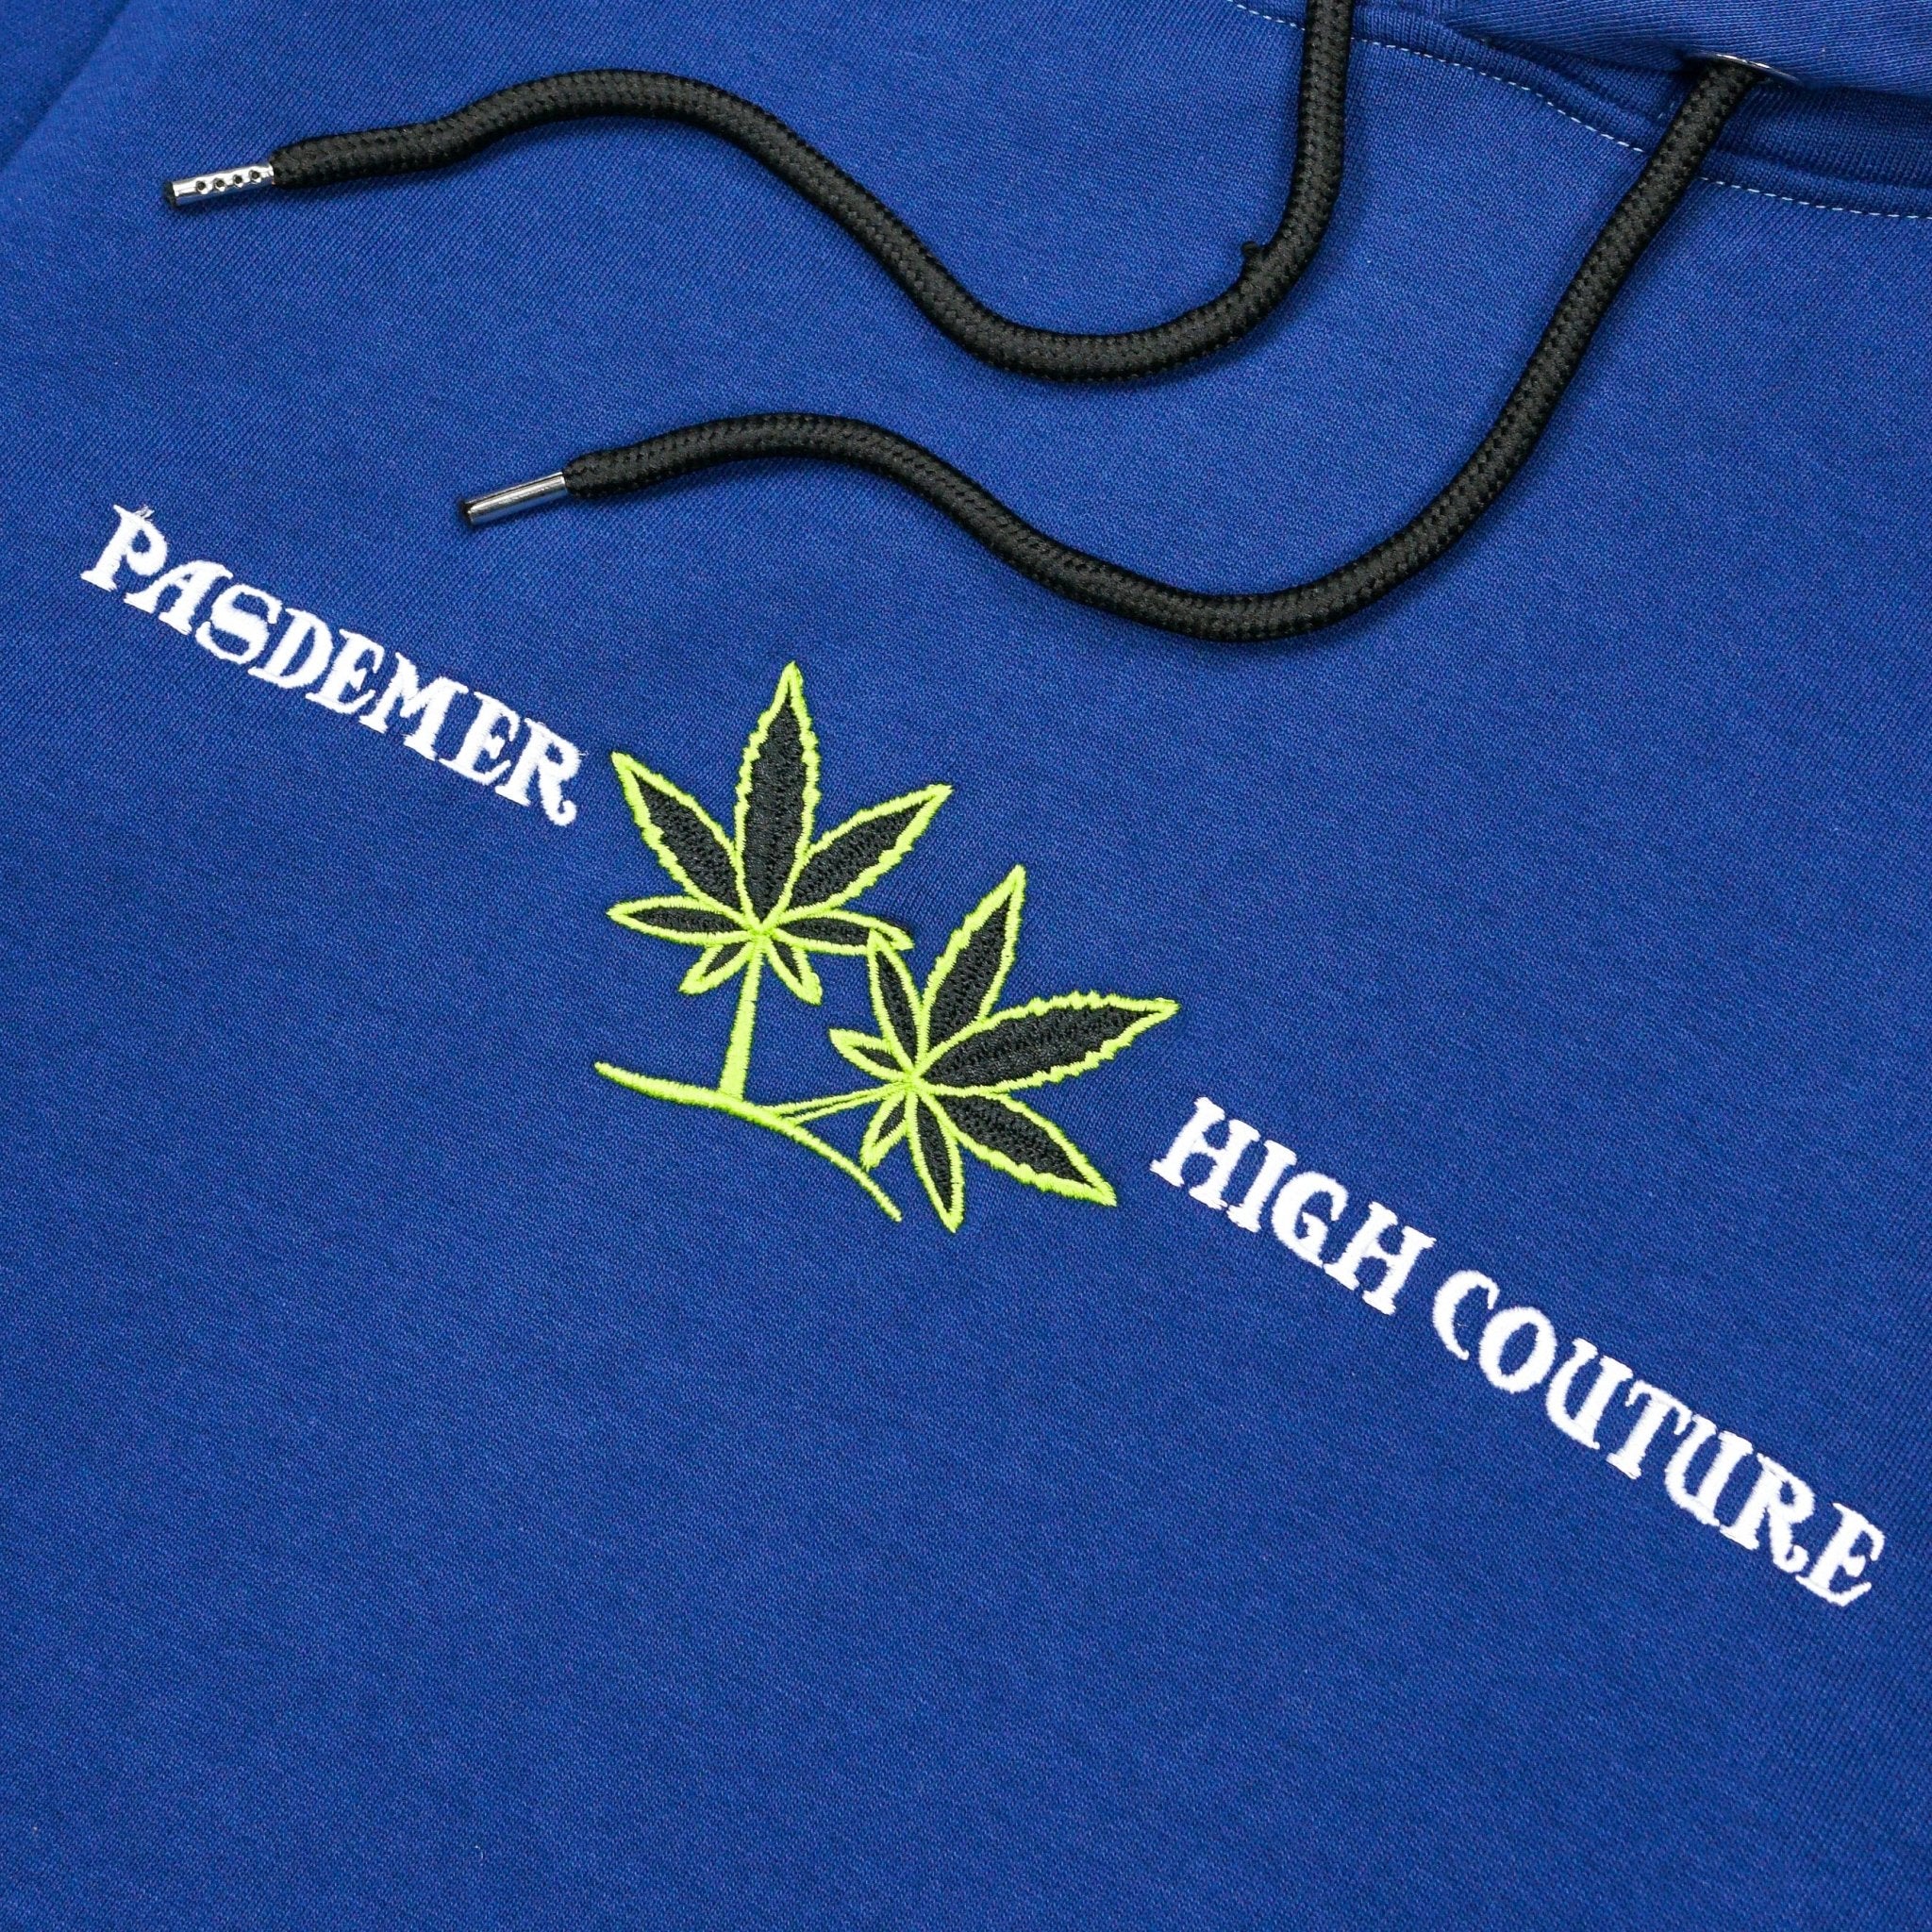 High Couture Hoodie in navy